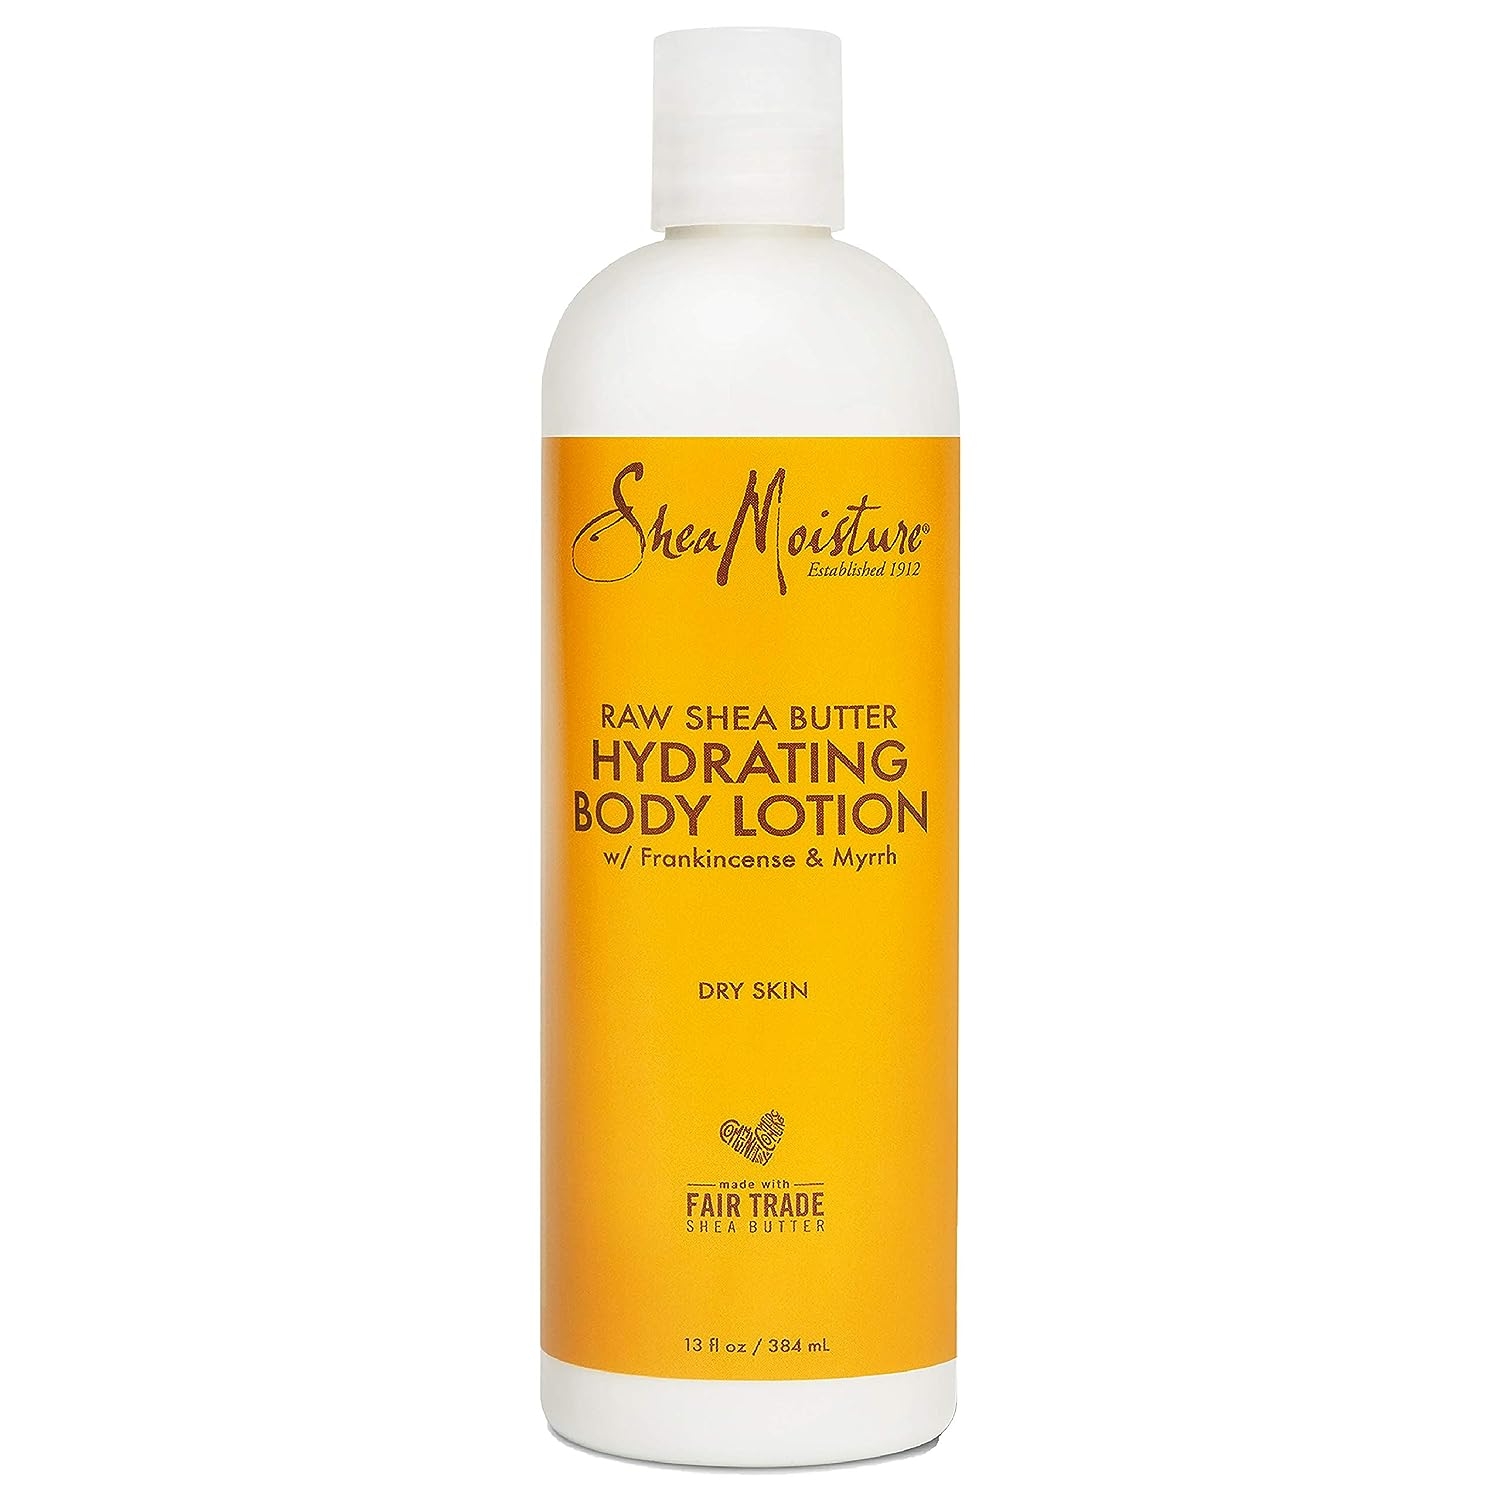 Sheamoisture Hydrating Body Lotion for Dry Skin Raw Shea Butter Paraben Free Lotion 13 oz   price checker   price checker